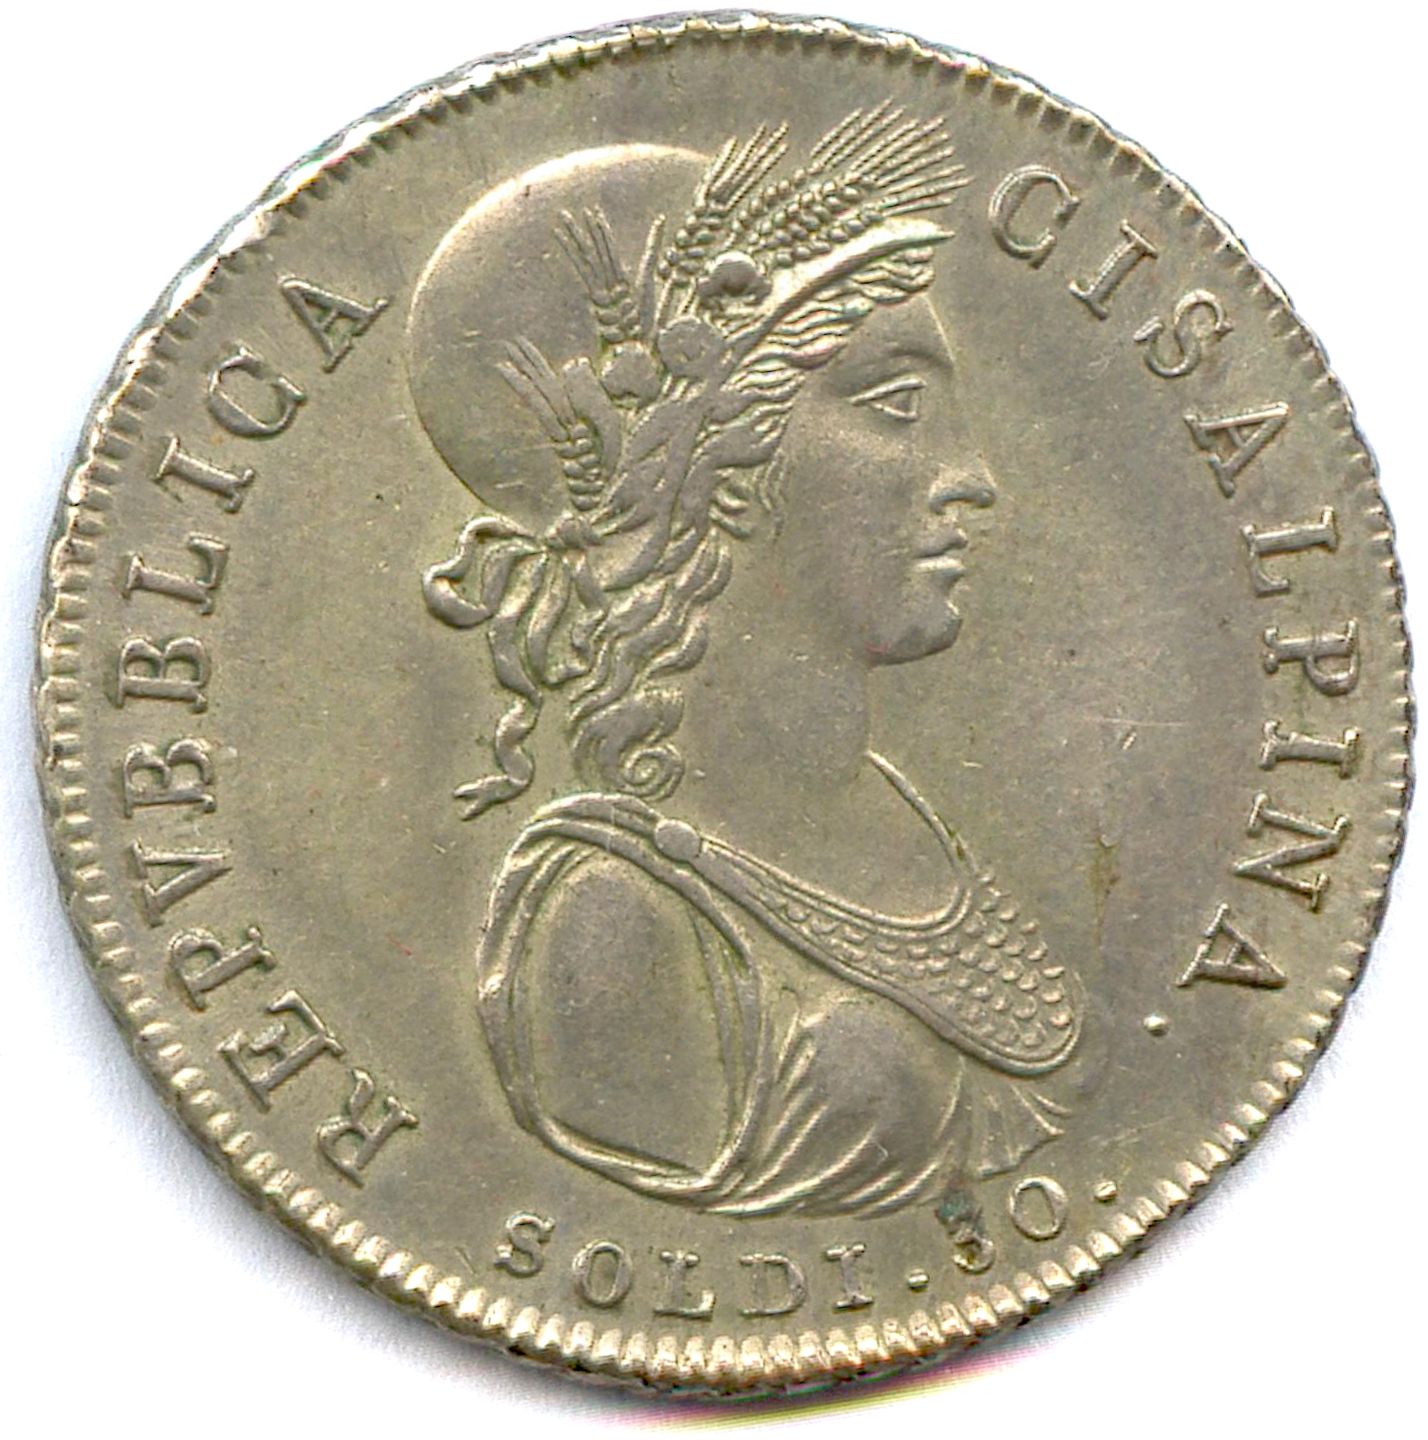 Null GAULE CISALPINE chief place Milan 1800-1802

30 Soldi in silver year IX (18&hellip;